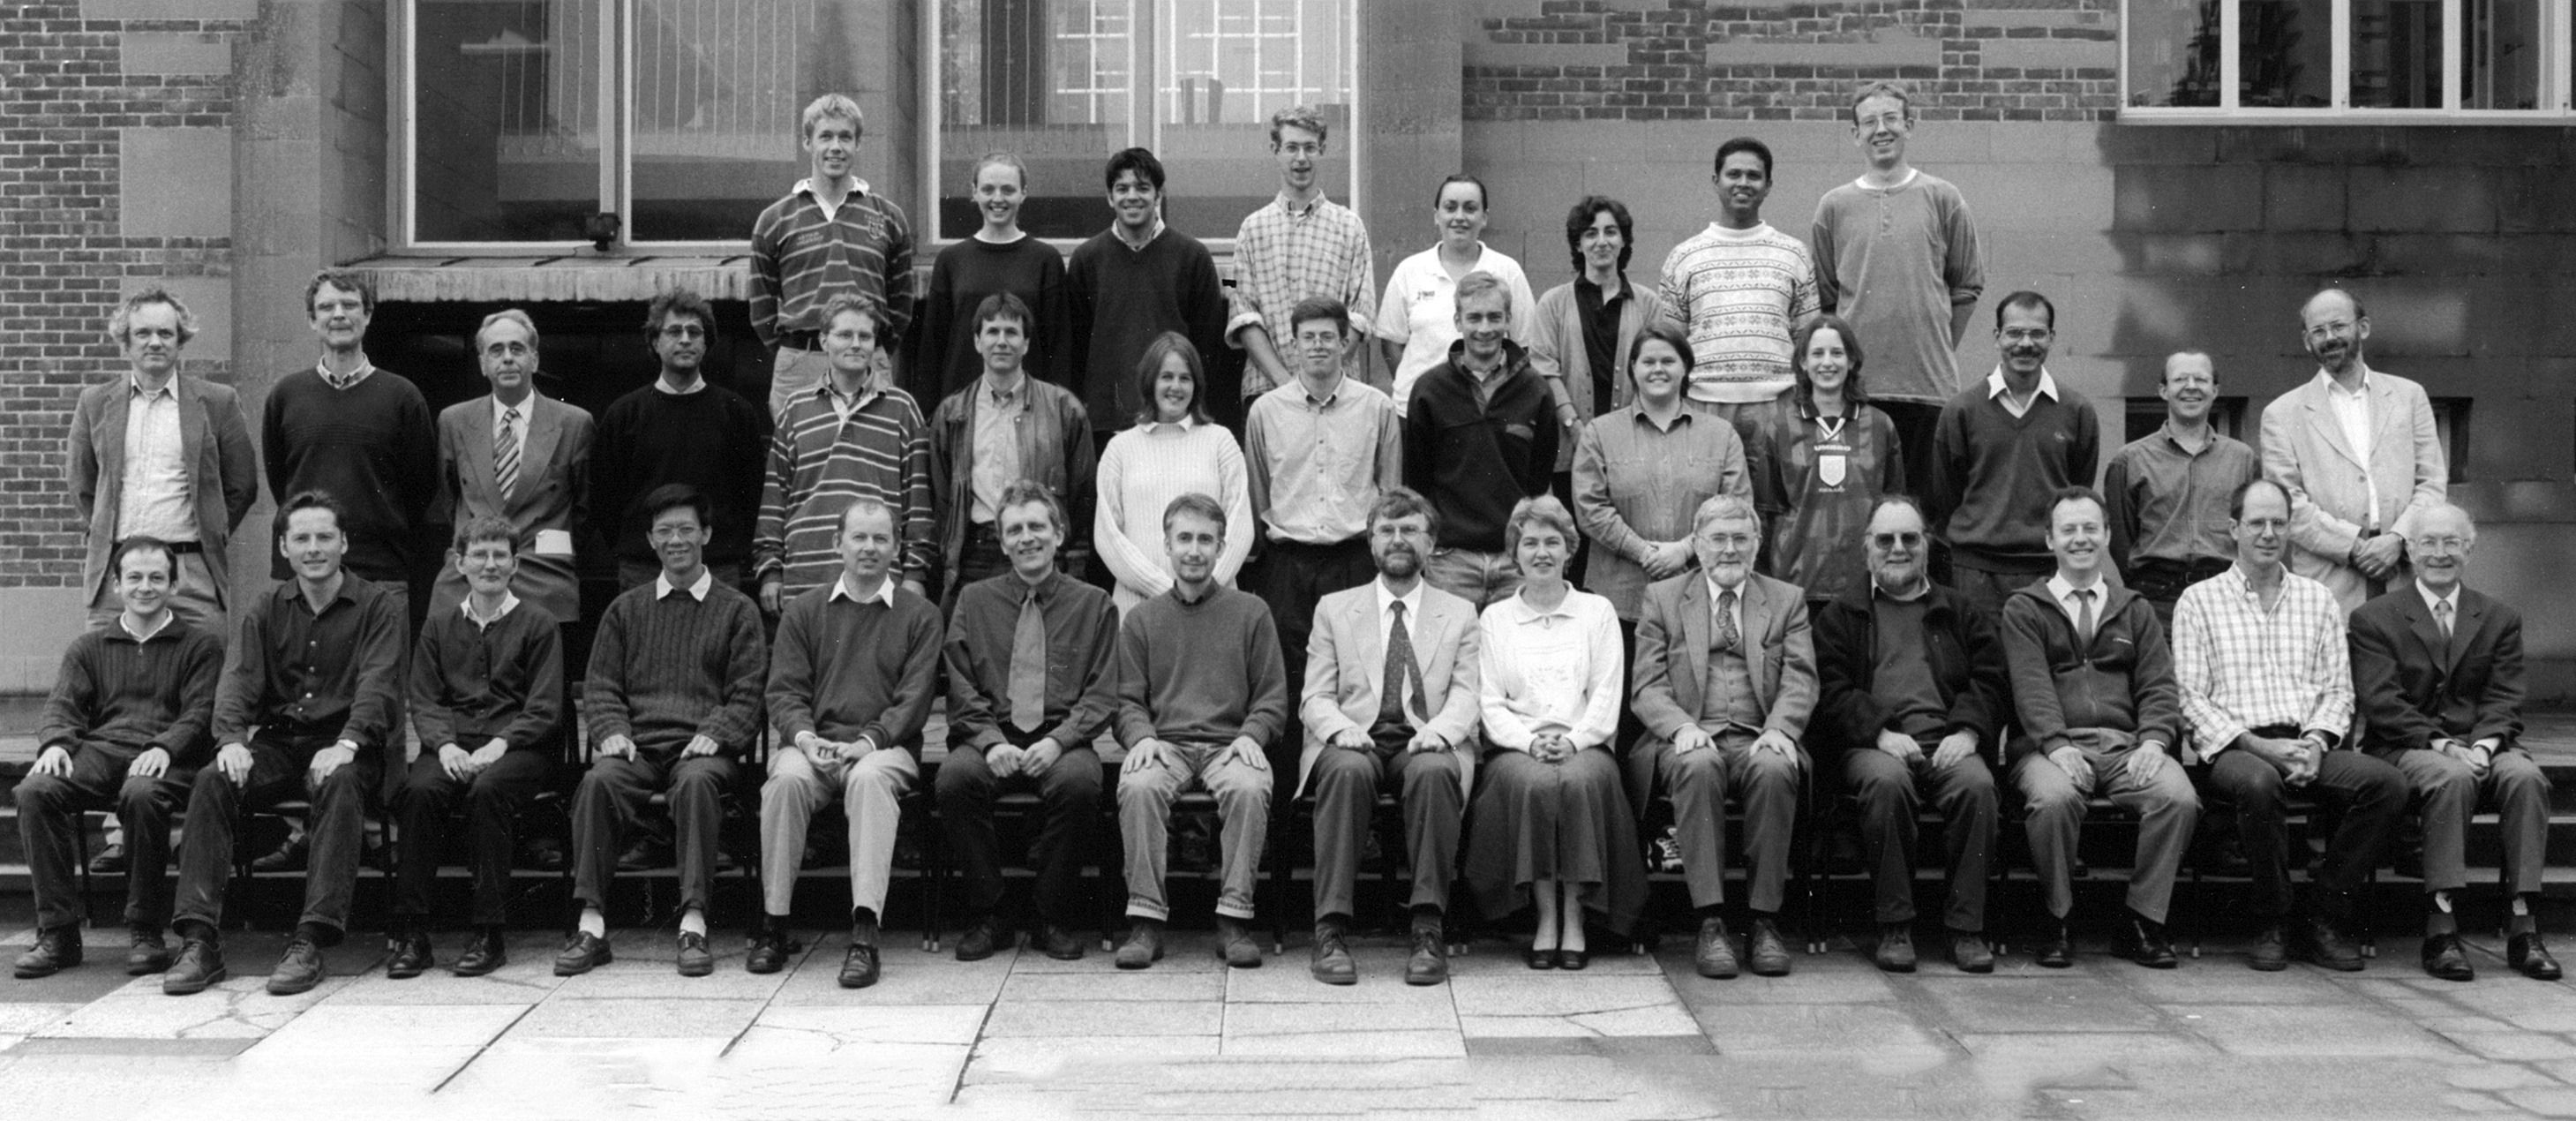 Geography Department Postgraduate Group Photo from 1998